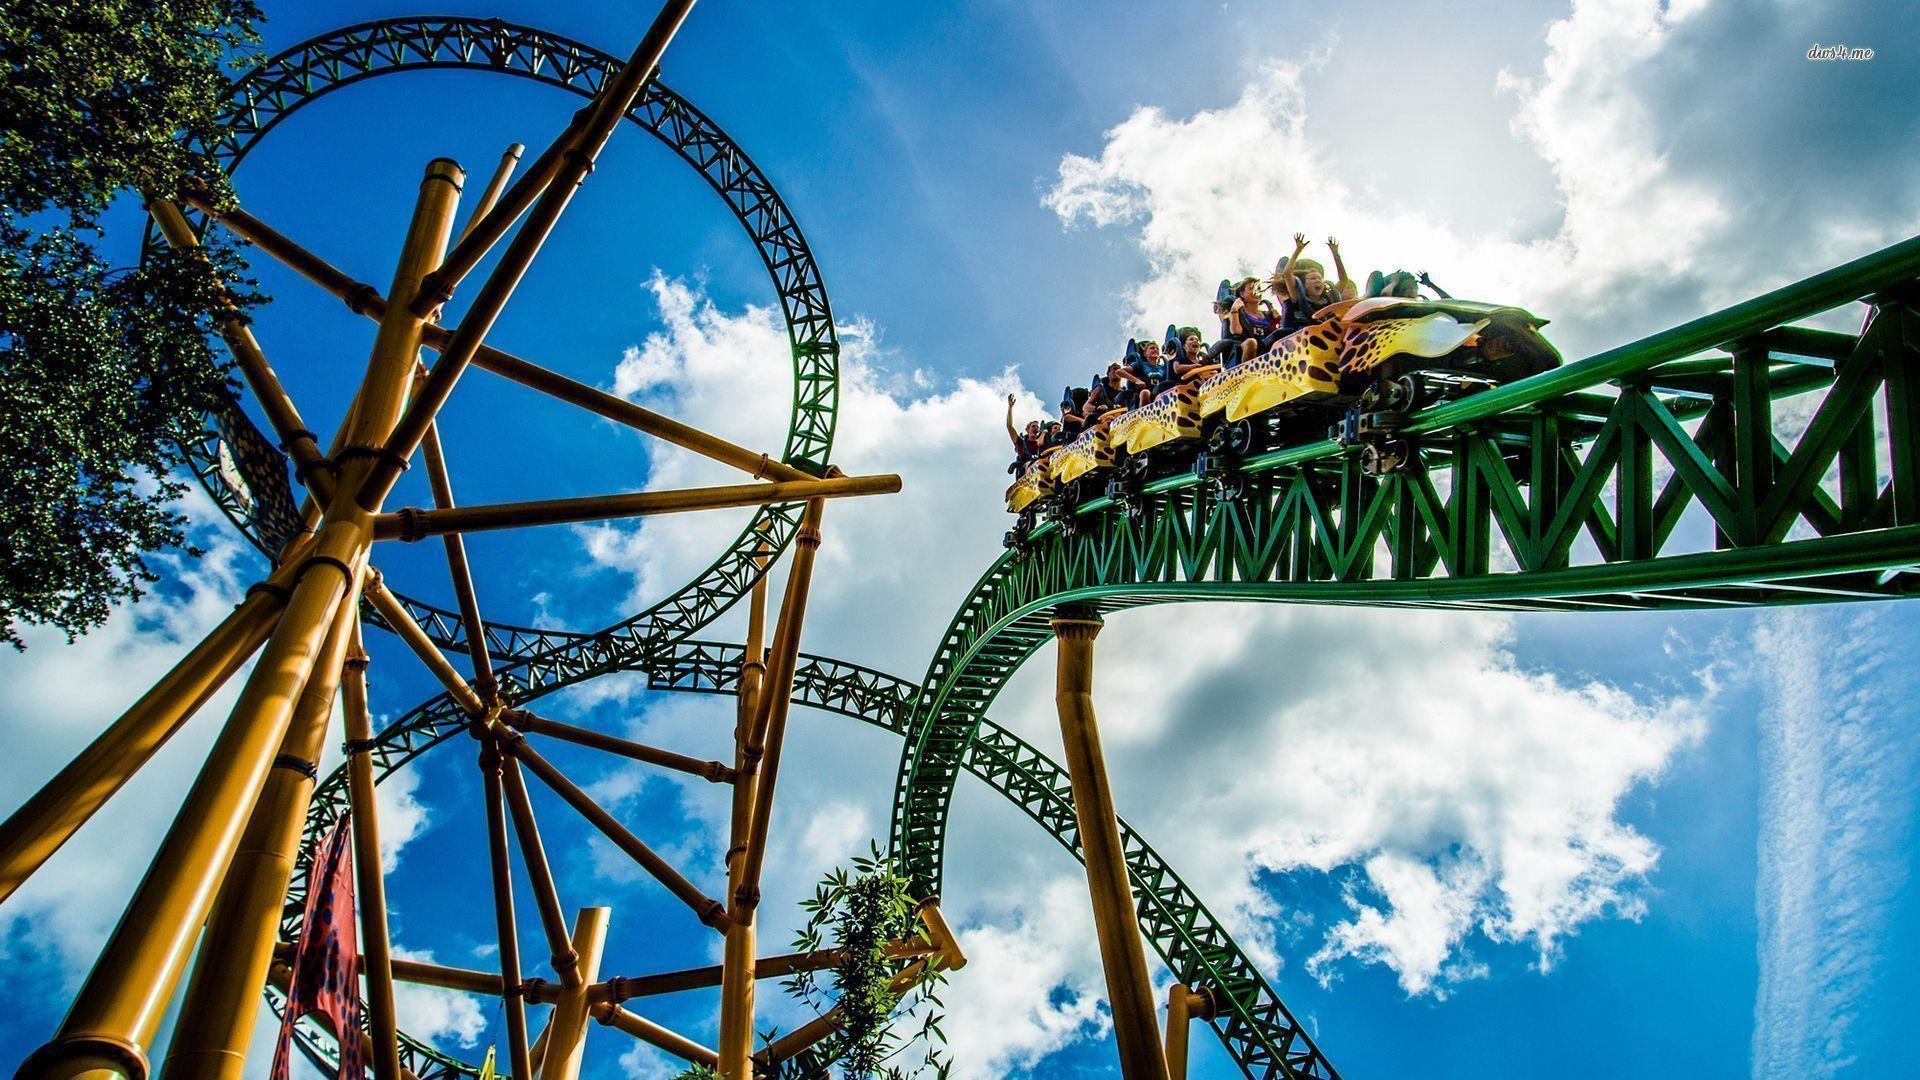 1920x1080 Roller coaster wallpaper - Photography wallpapers - #